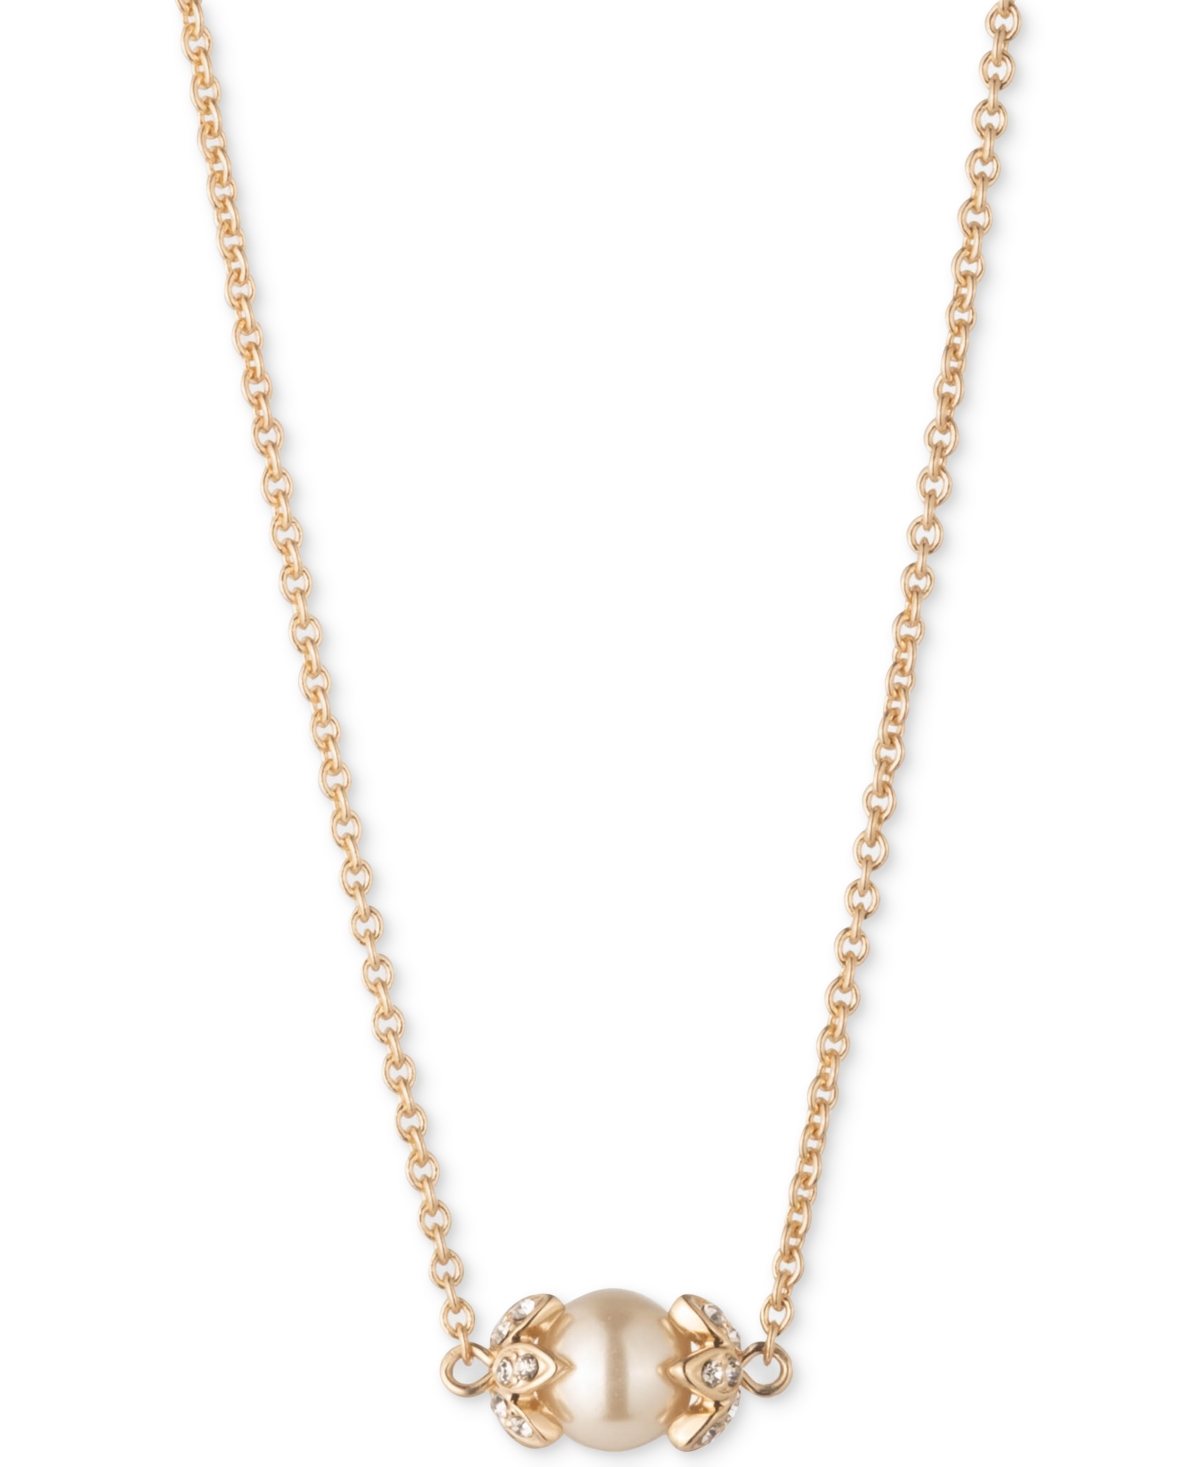 Gold-Tone Imitation Pearl Pendant Necklace, 16" + 3" extender - Pearl